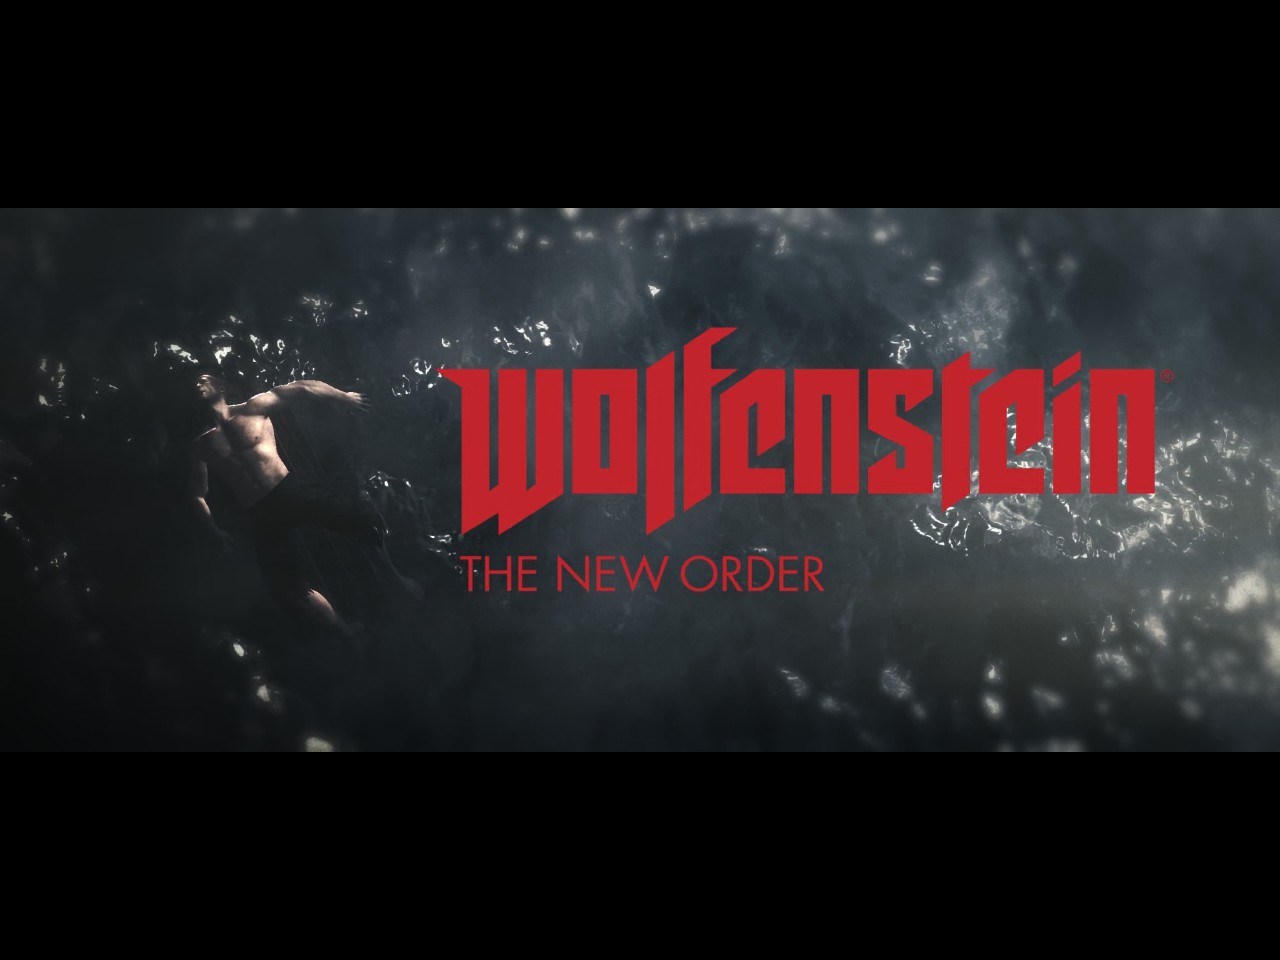 Wolfenstein the New Order: Reviving a Brand and FPS - Game Wisdom